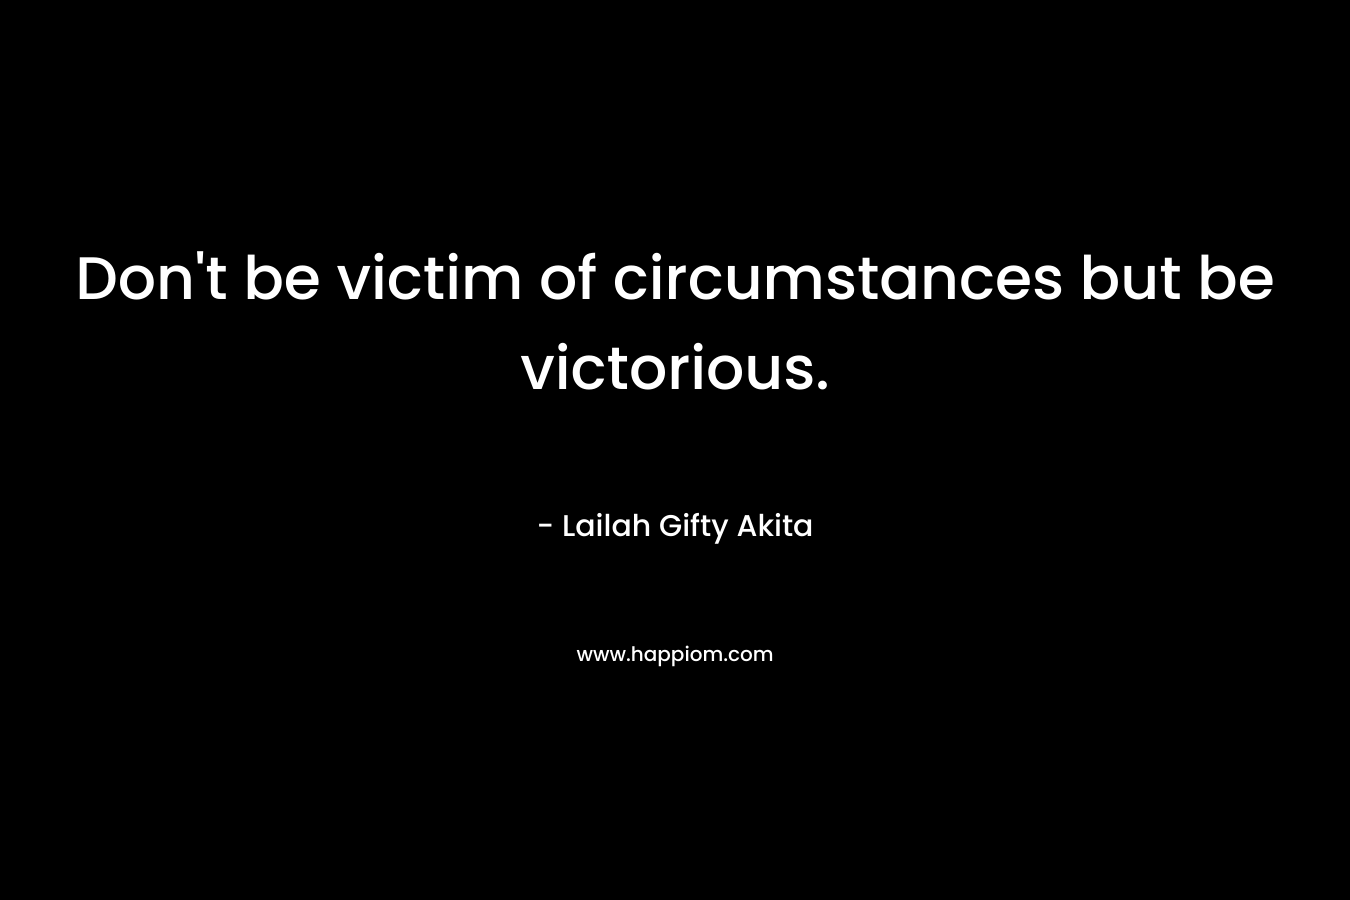 Don't be victim of circumstances but be victorious.